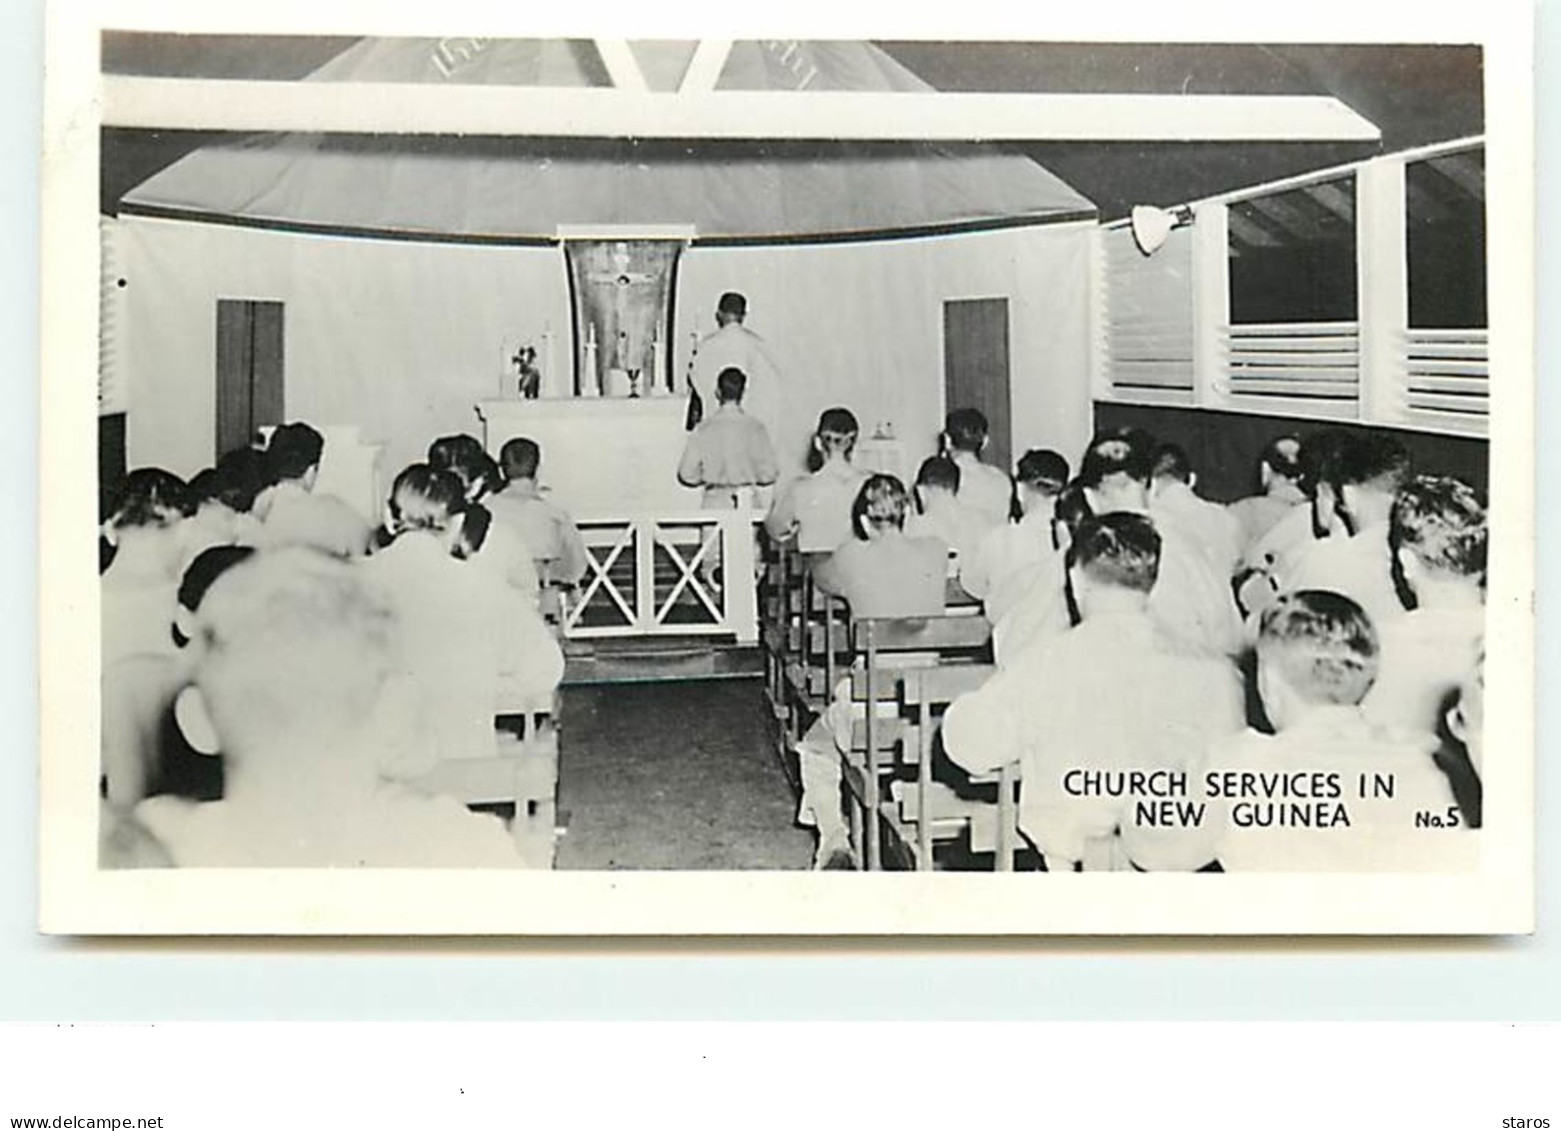 Church Services In New Guinea - Papouasie-Nouvelle-Guinée